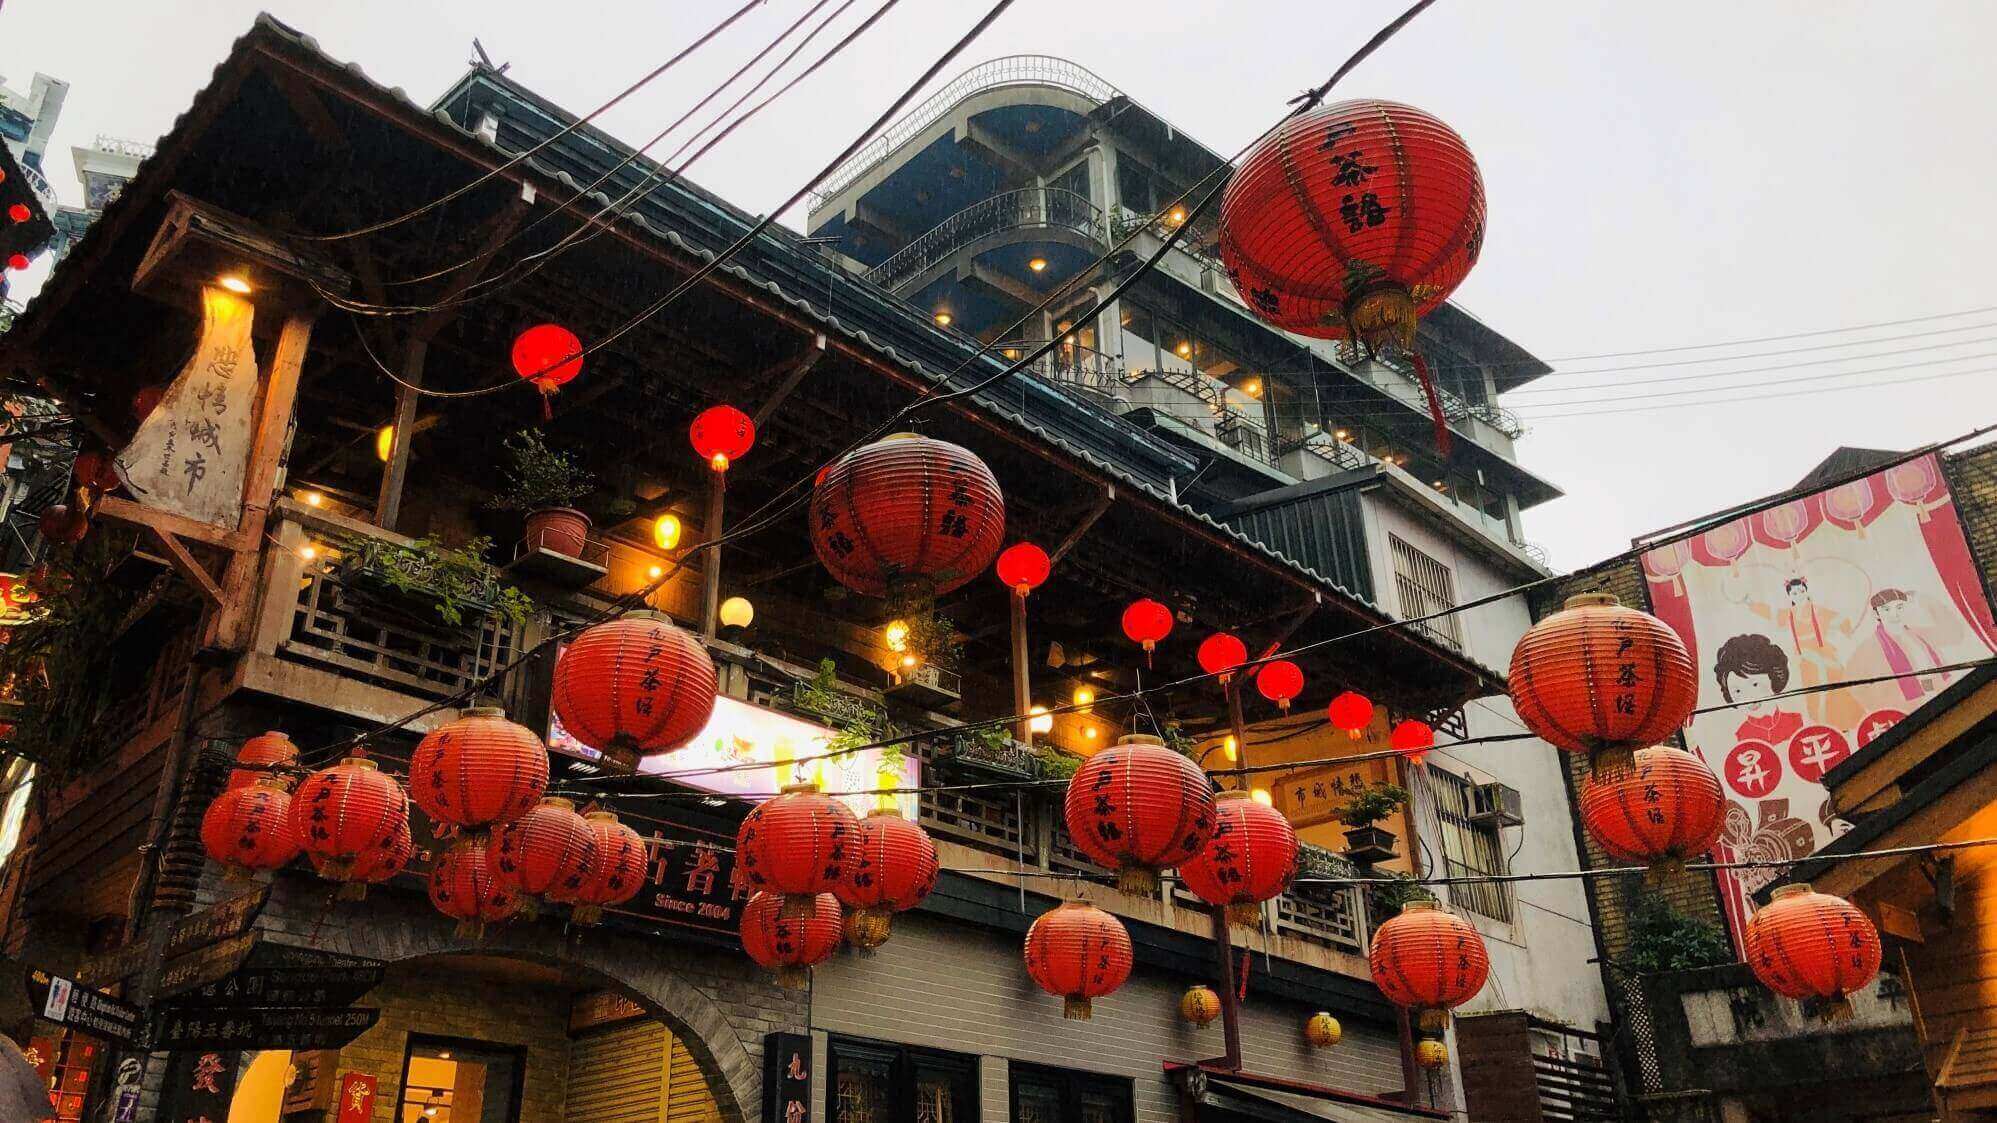 Get Lost in Jiufen, the Fairyland in the Real World